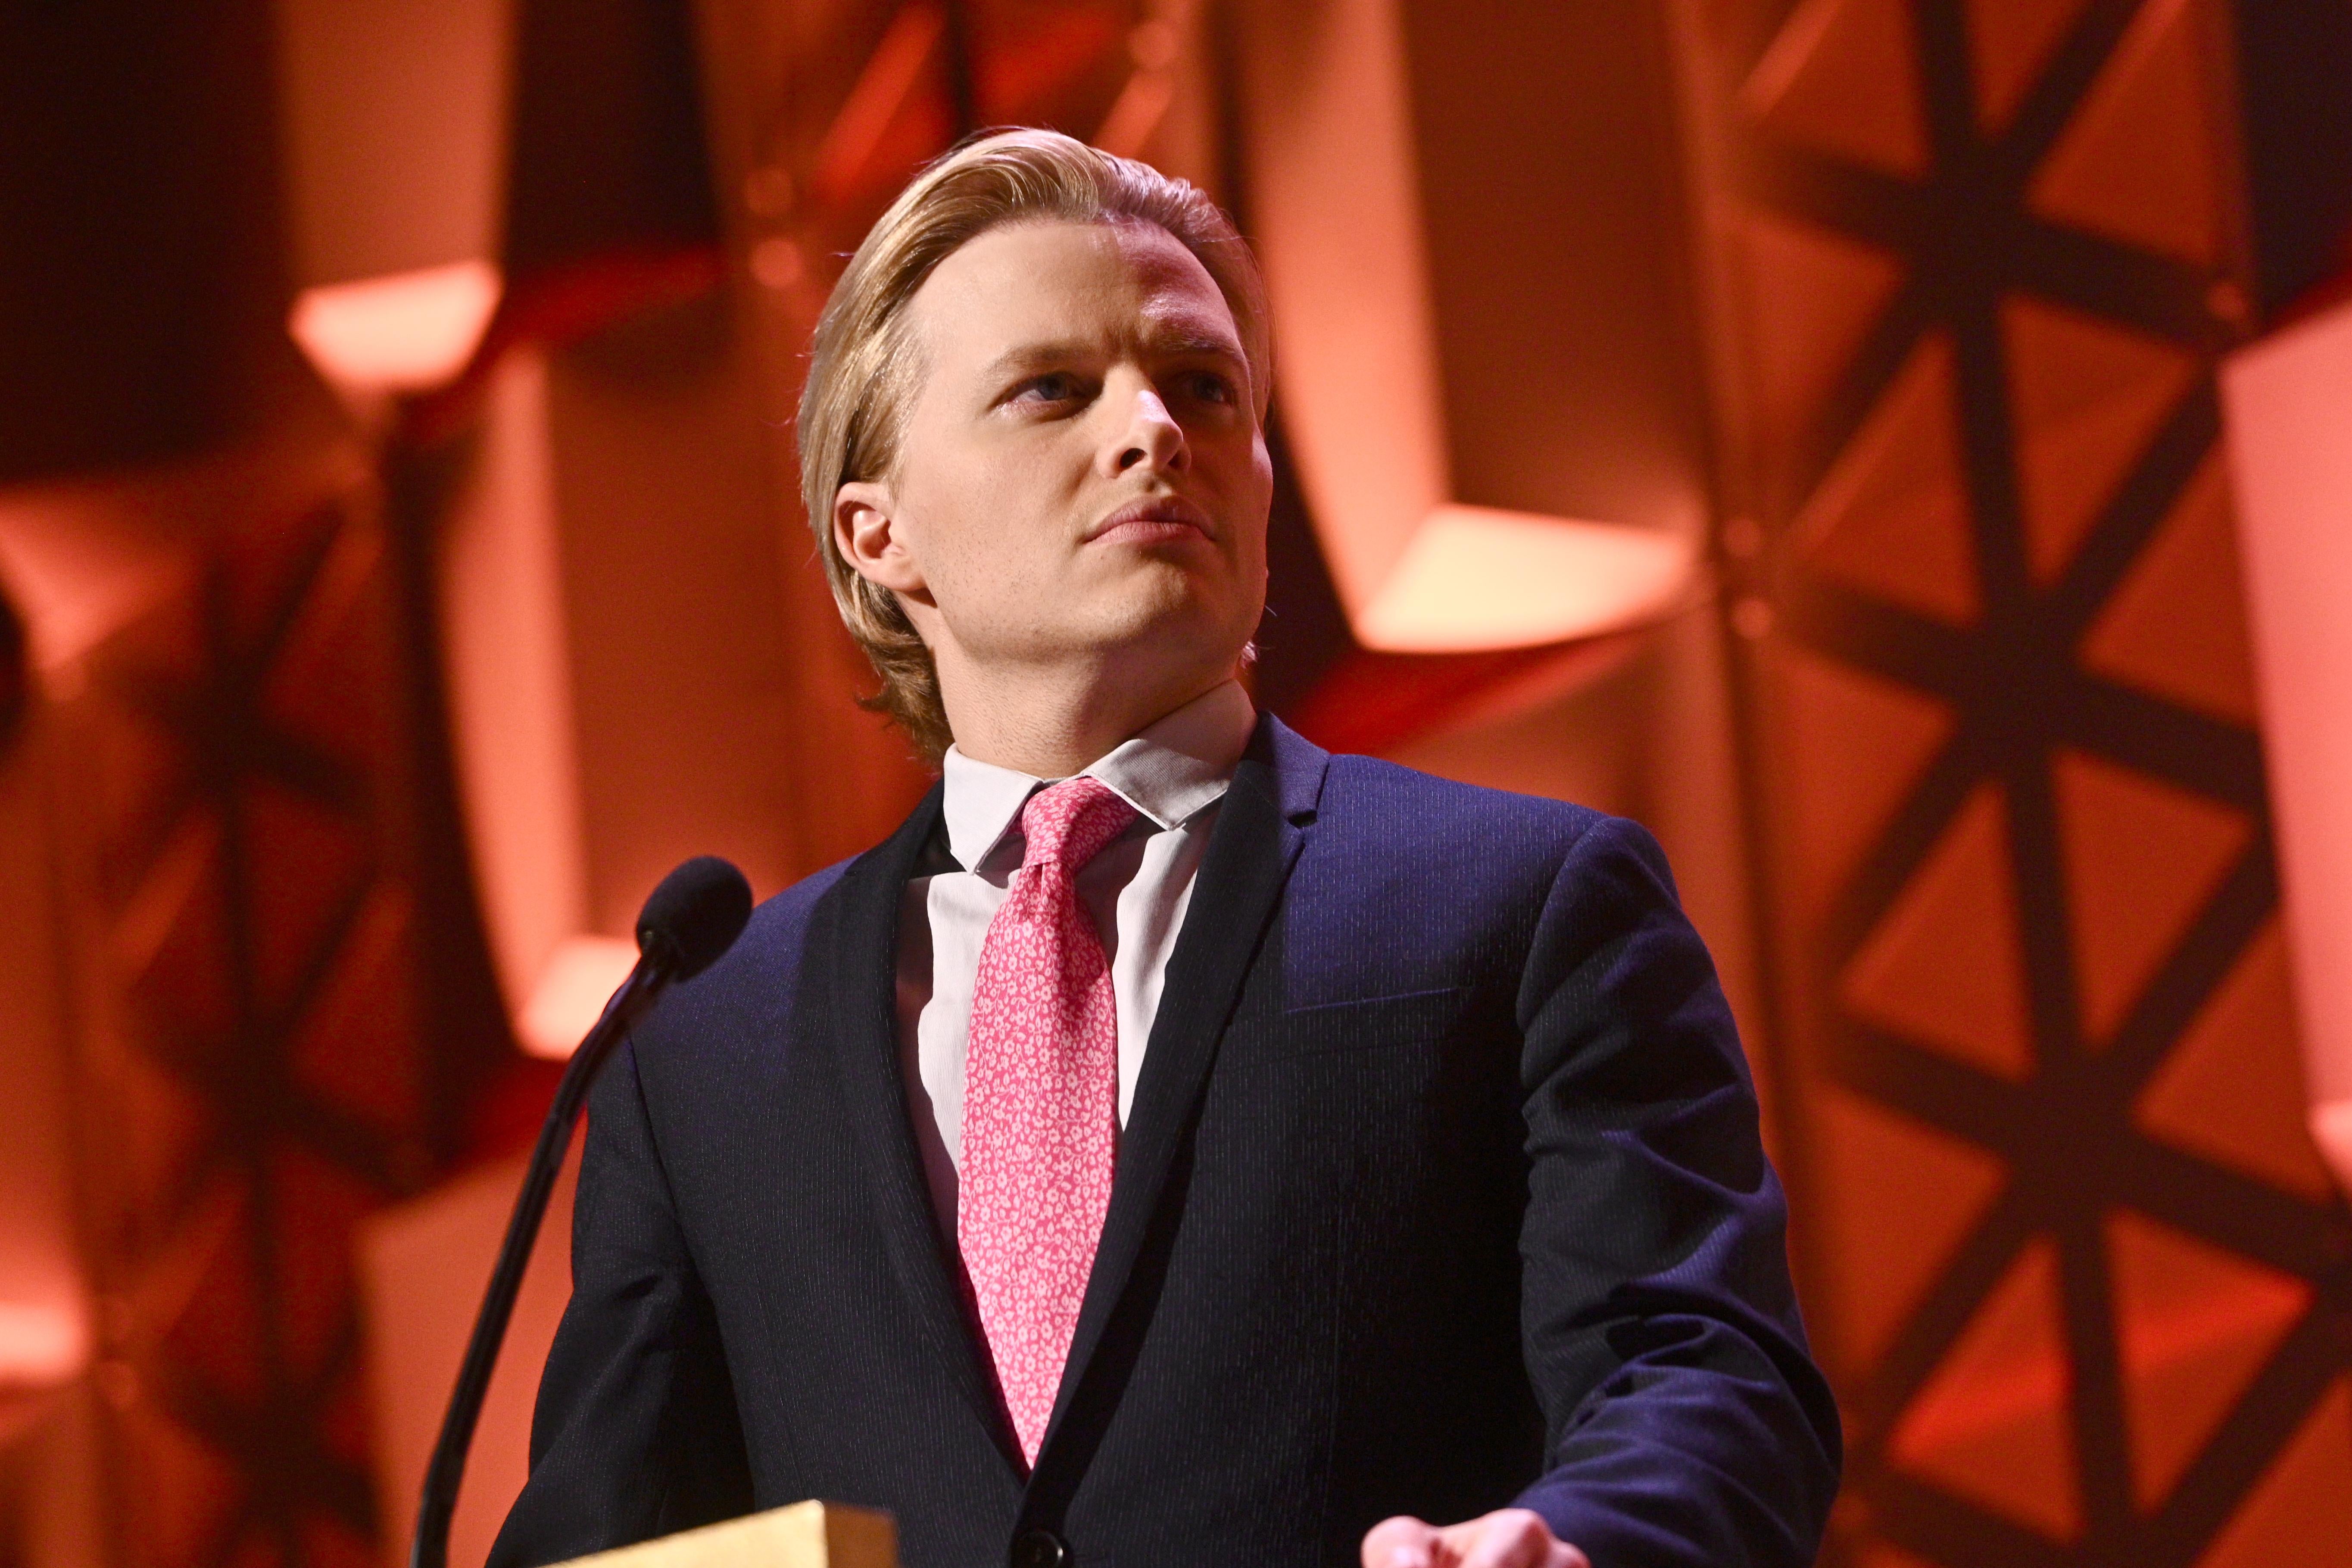 Ronan Farrow behind a podium with a red background.